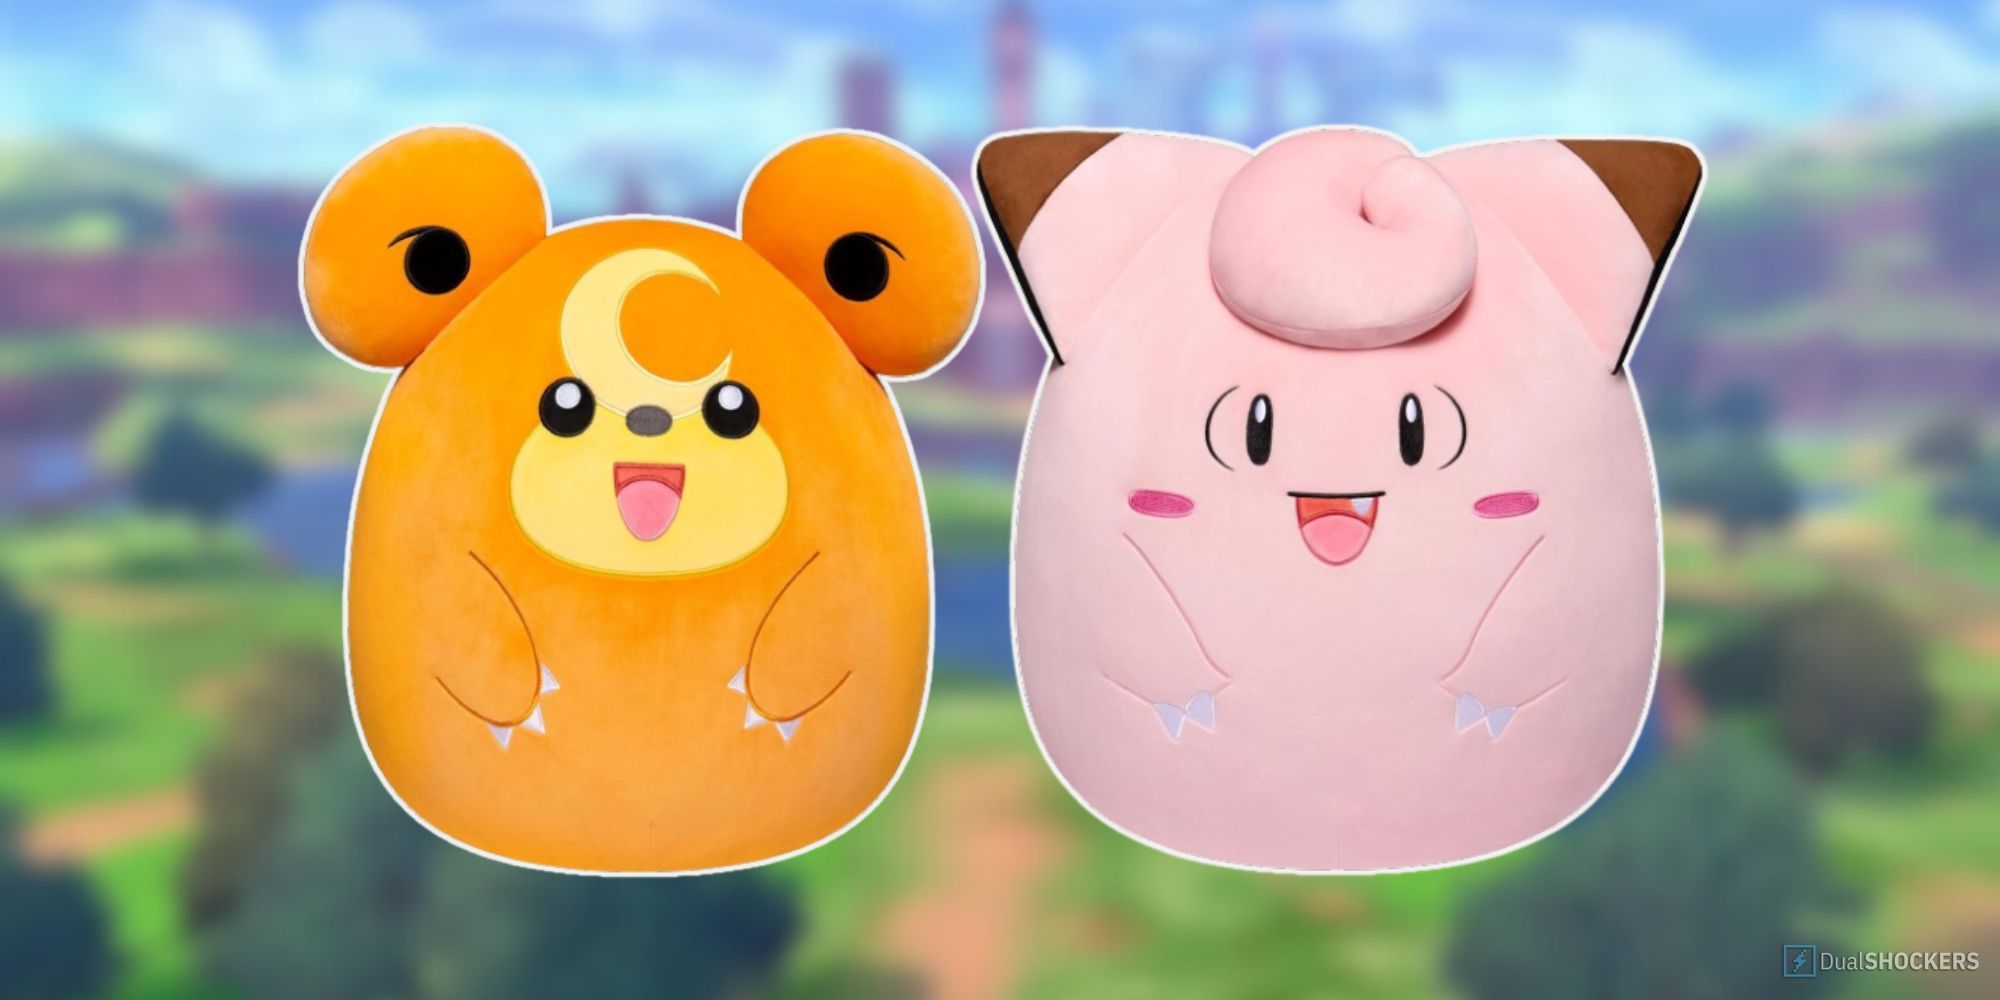 Feature image with blurred wilds background and the Clefairy and Teddiursa Squishmallows in the foreground